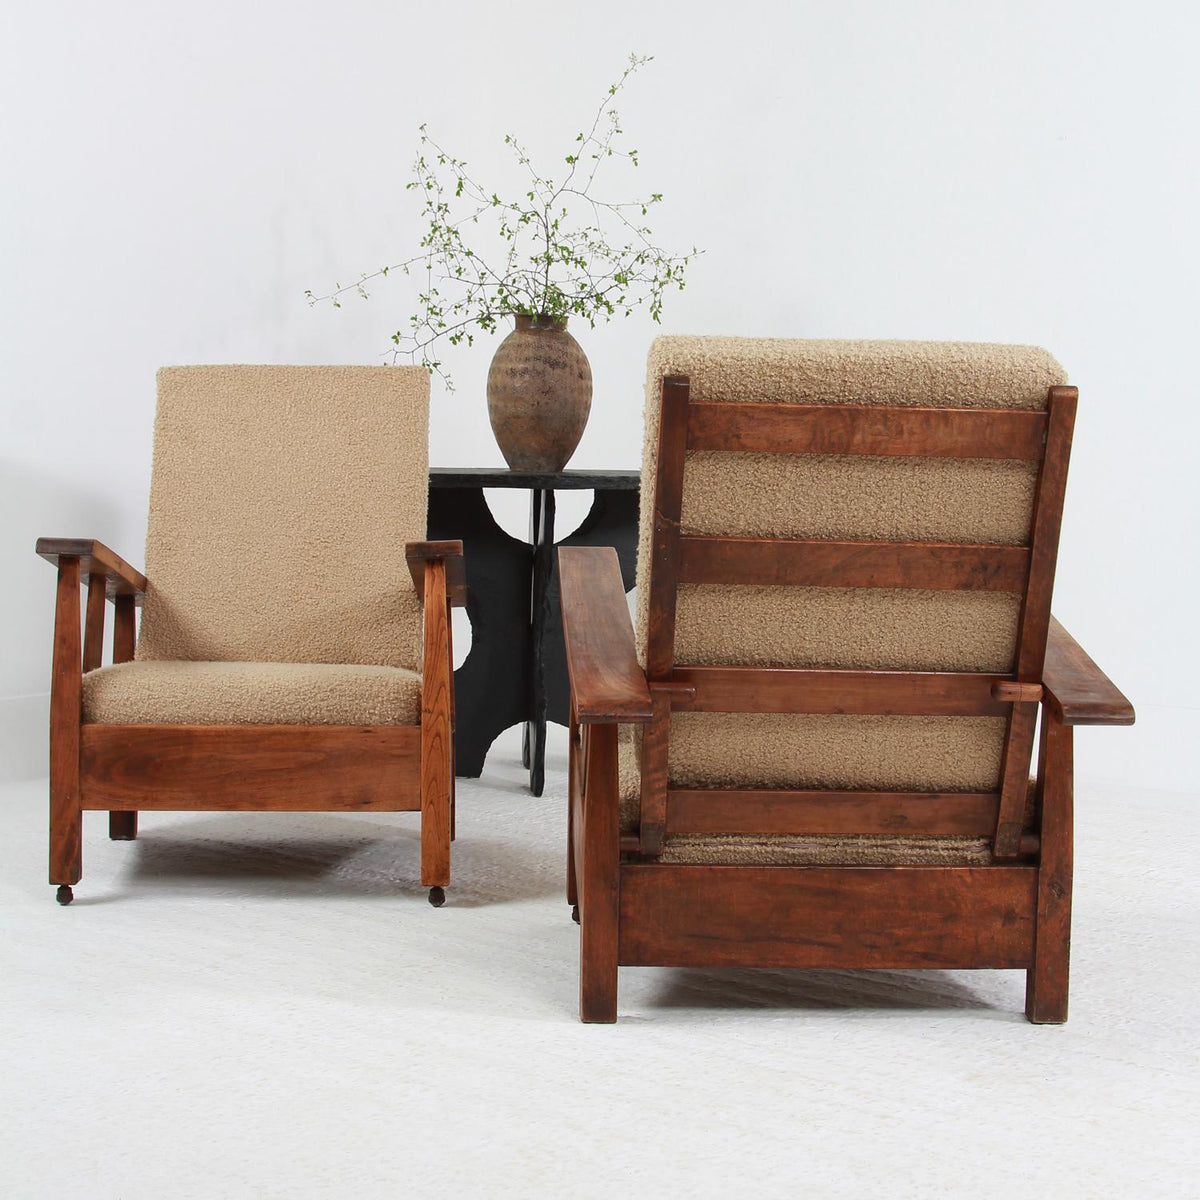 Large PAIR OF BRUTALIST SPANISH LOUNGE CHAIRS UPHOLSTERED IN BOUCLE